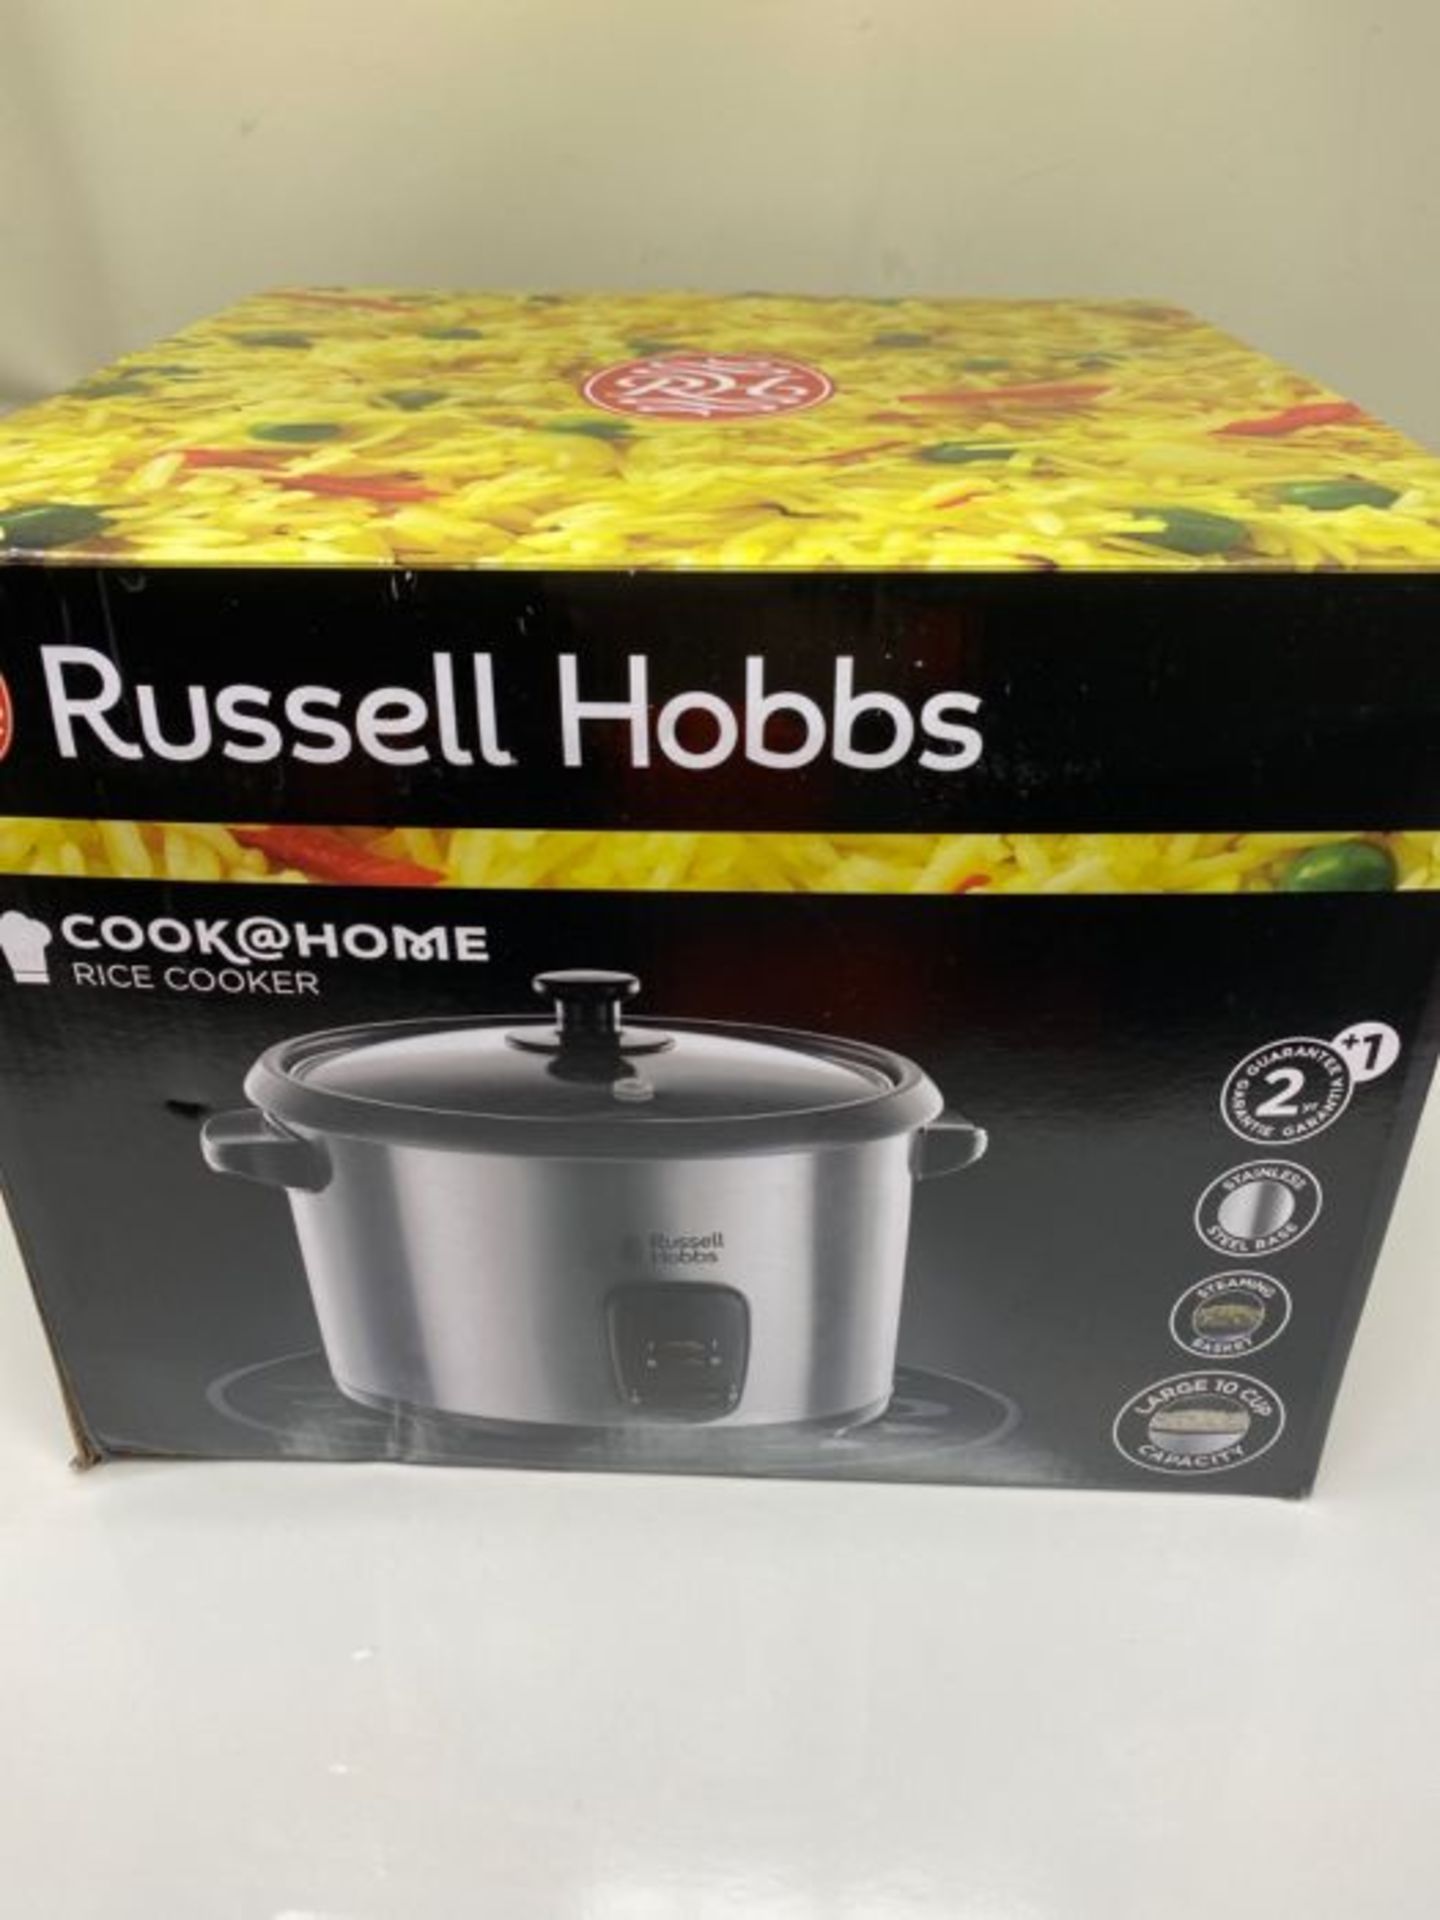 Russell Hobbs Cook @ Home 19750-56 rice cooker with 700 W and 1.8 litre capacity made - Image 2 of 3